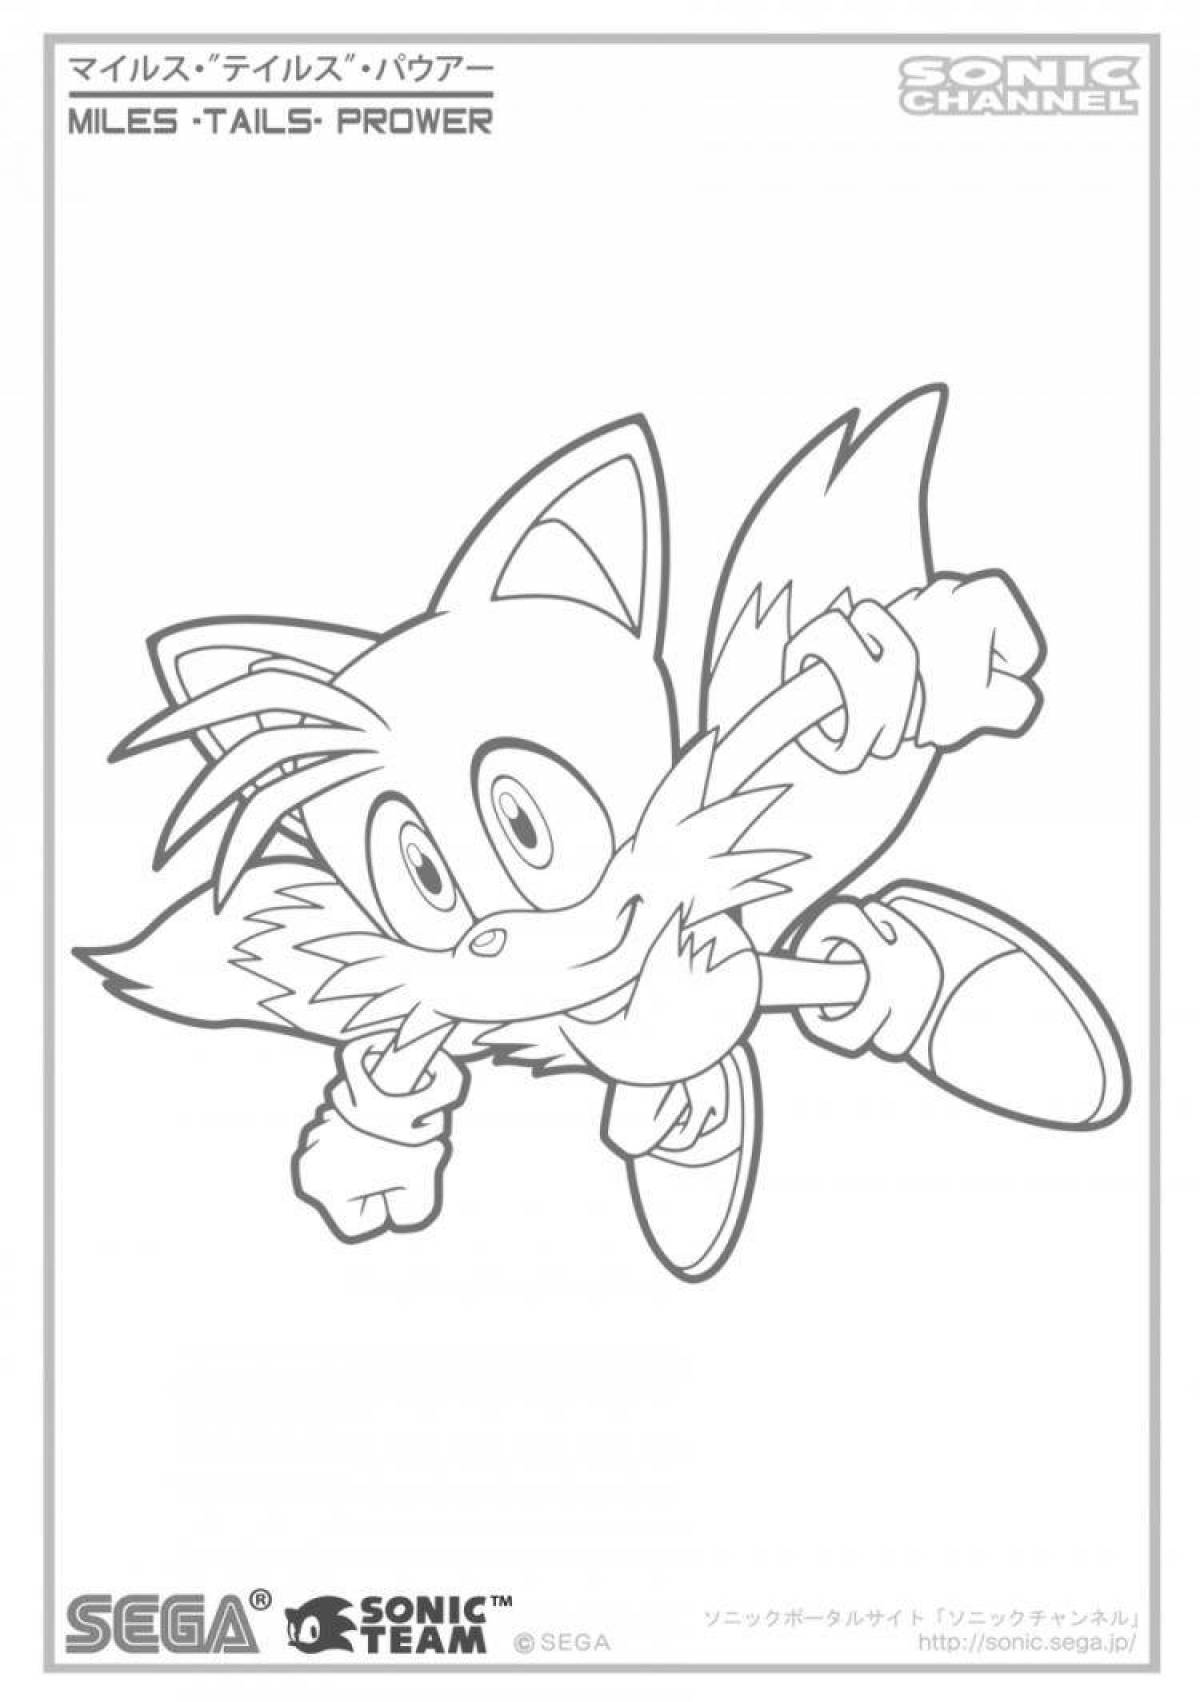 Miles Tails Prower's incredible coloring book